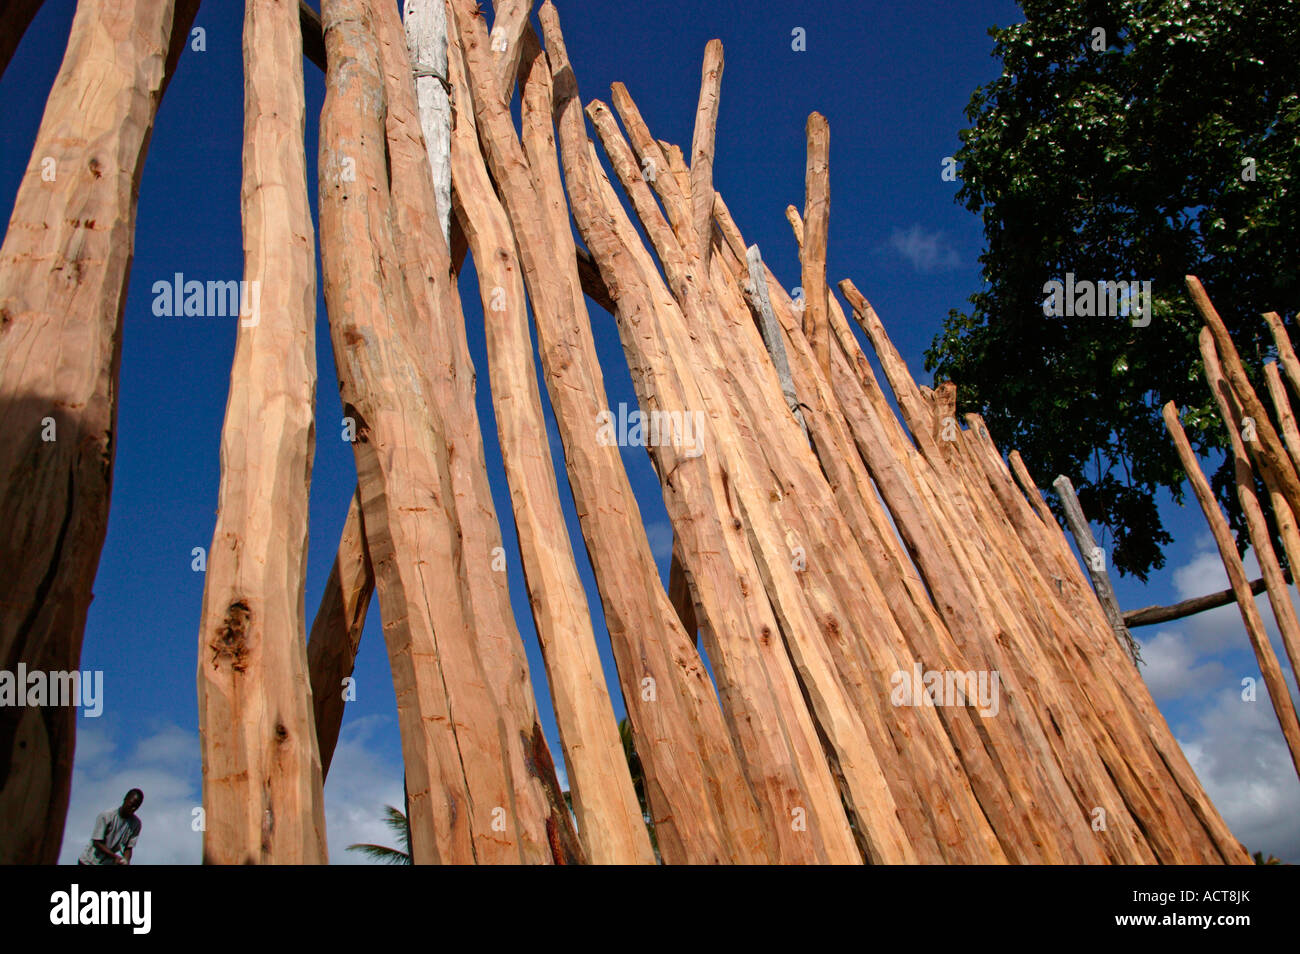 A log yard selling Lebombo Ironwood Androstachys johnsonii poles price 35 Metecals the equivalent of US 1 50 per pole Stock Photo